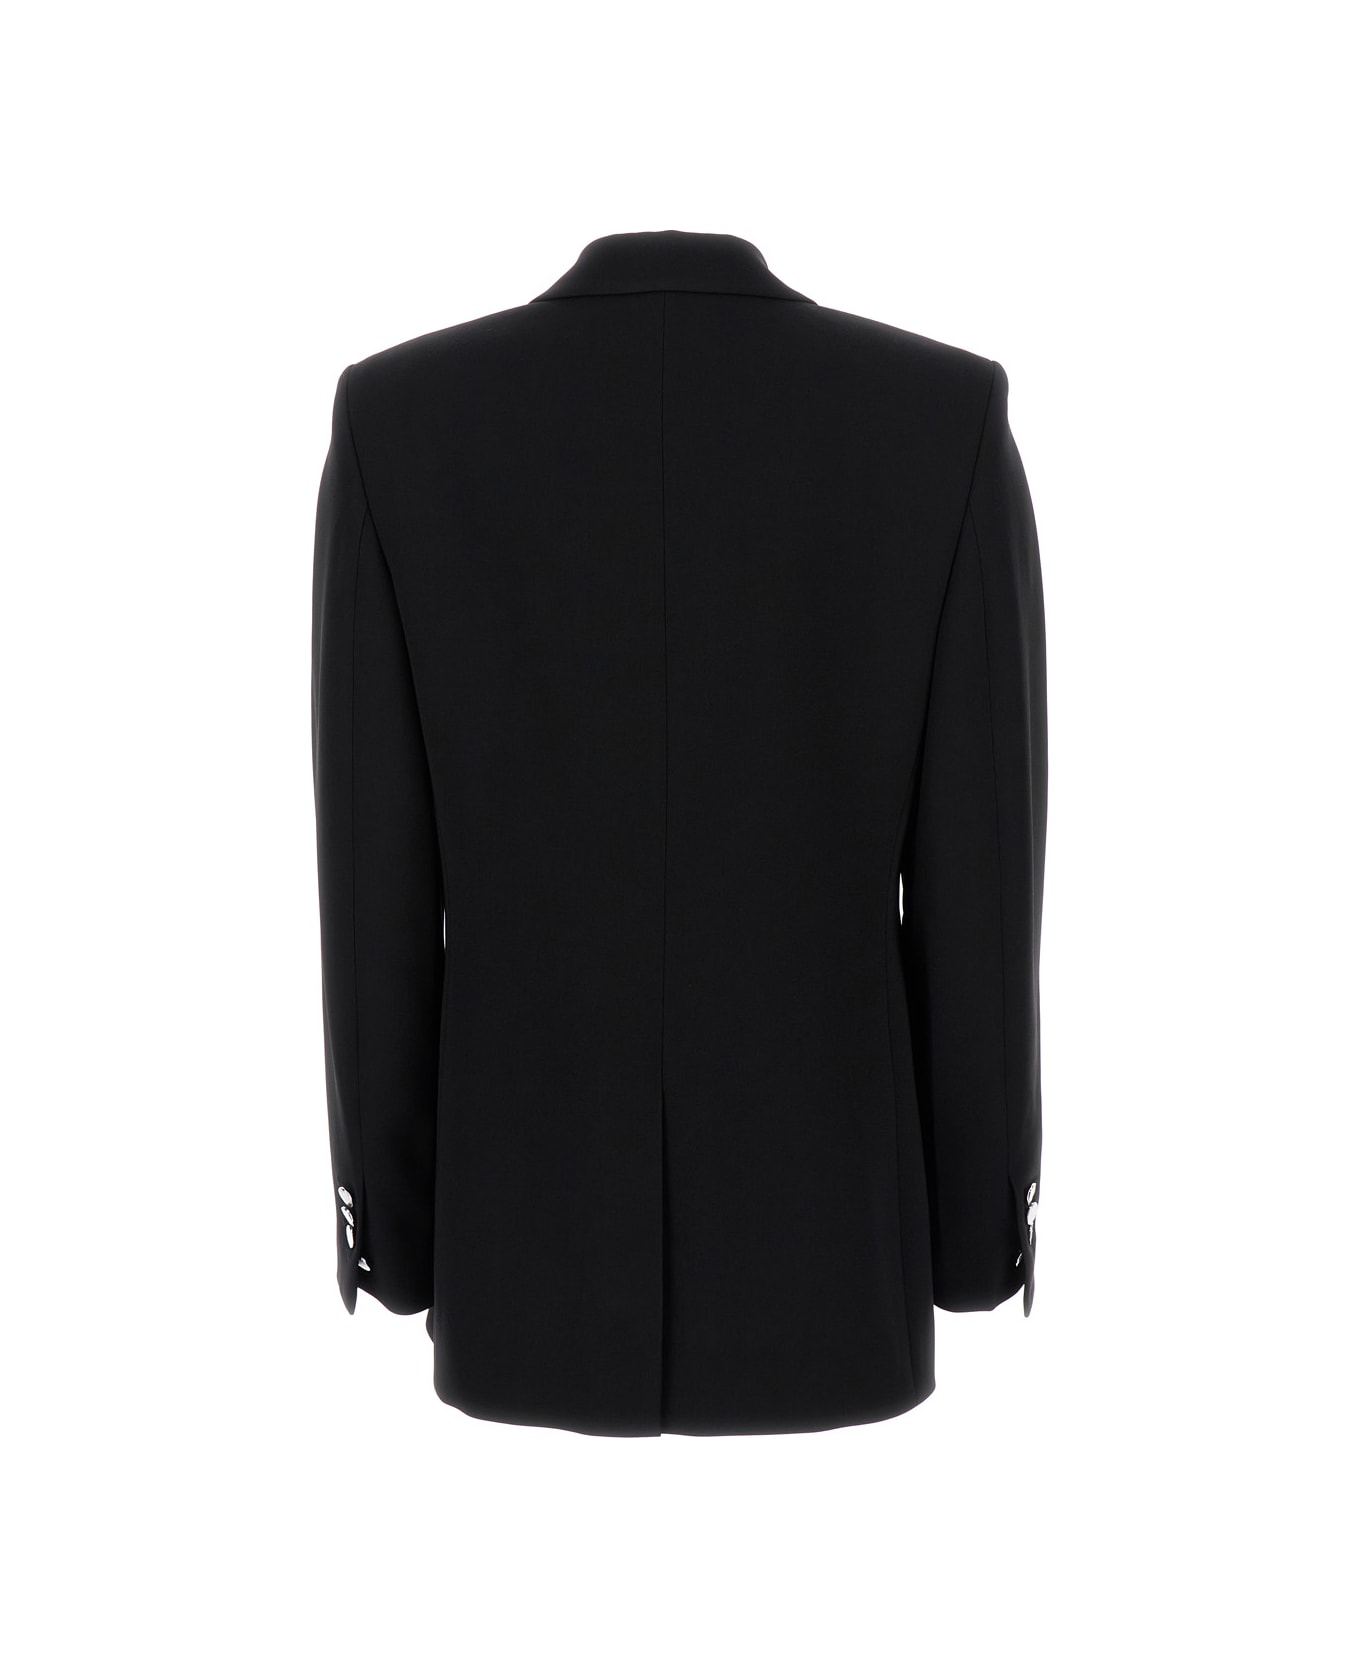 Theory Black Single-breasted Blazer With Classic Lapels In Technical Fabric Woman - Black ブレザー